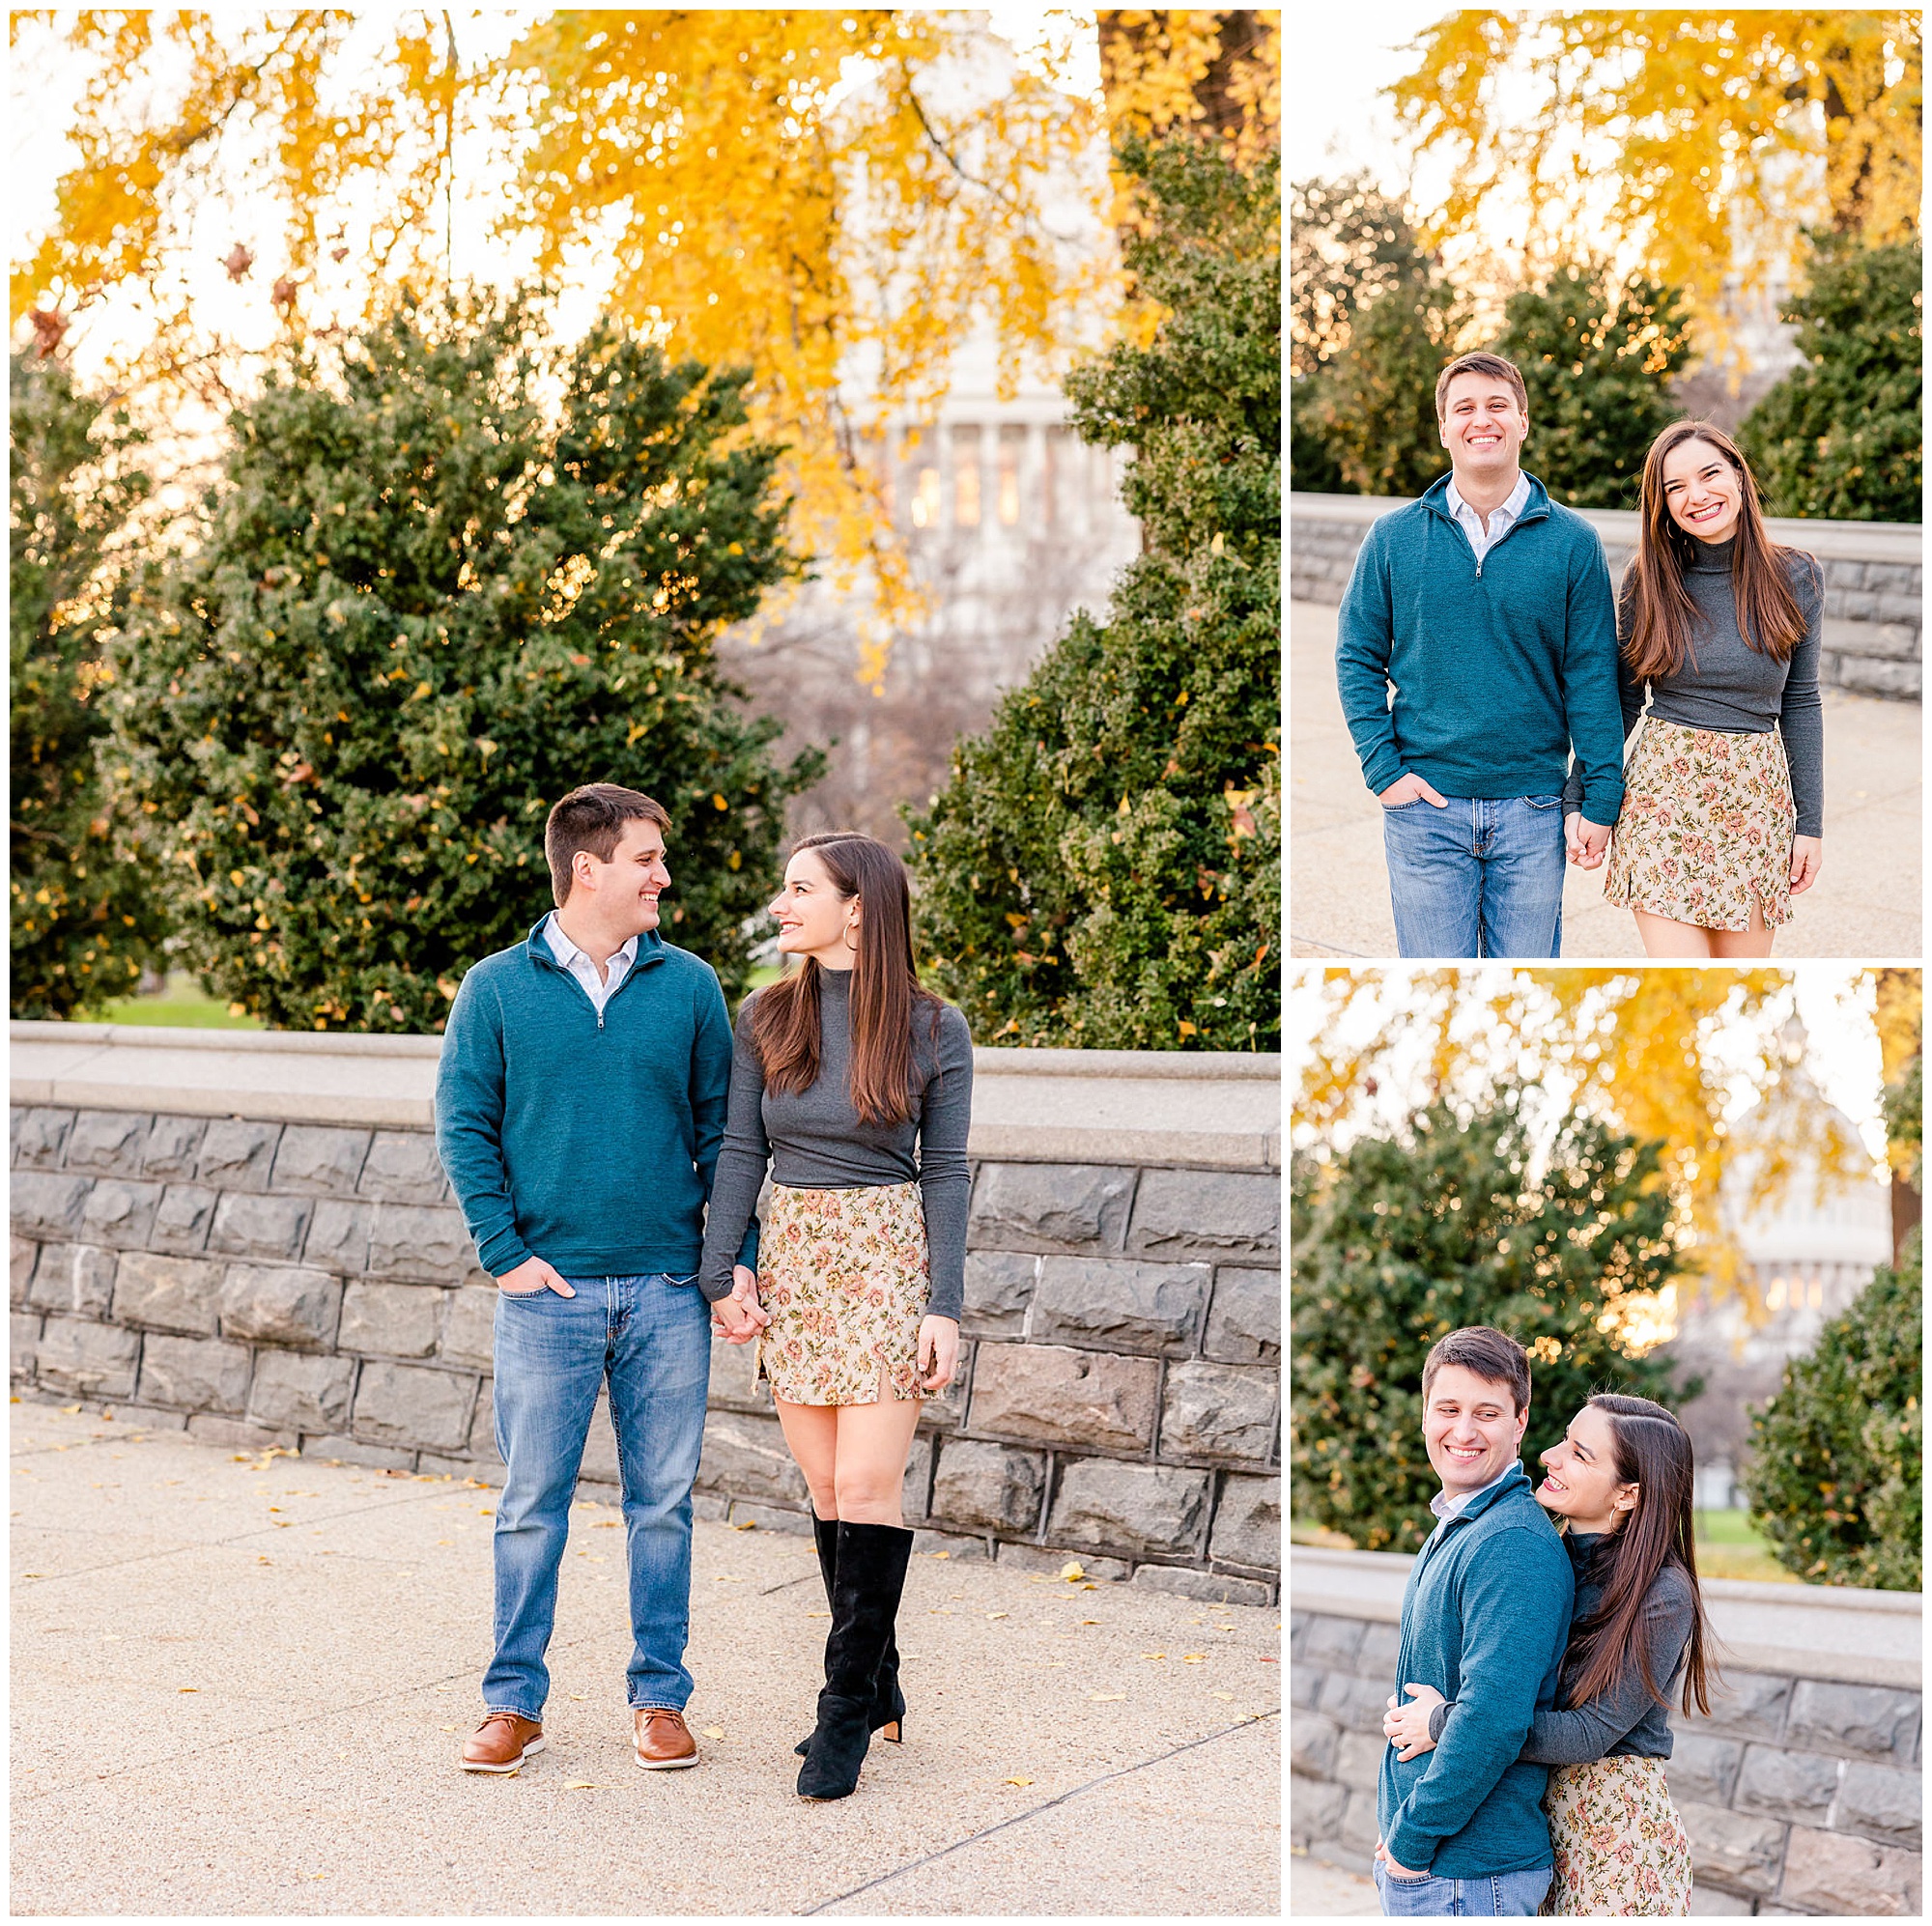 autumn Capitol Hill engagement session, Capitol Hill engagement photos, Capitol Hill photographer, DC engagement photography, DC engagement photographer, DC wedding photography, autumn engagement photos, casual engagement photos, Rachel E.H. Photography, couple smiling at each other, woman hugging man from behind